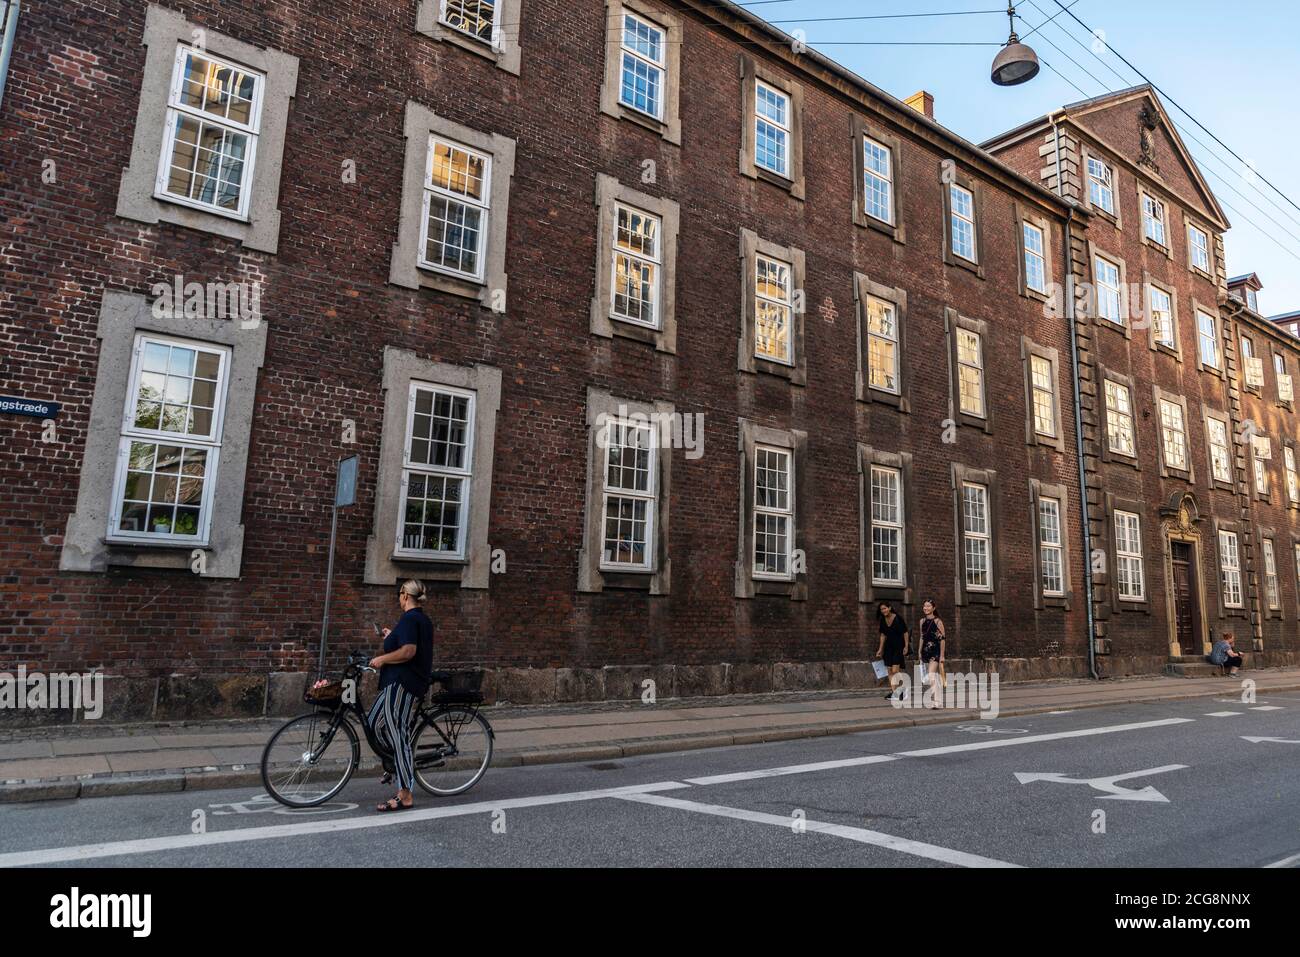 Copenhagen, Denmark - August 26, 2019: Street with people on bicycle and walking in the old town of Copenhagen, Denmark Stock Photo